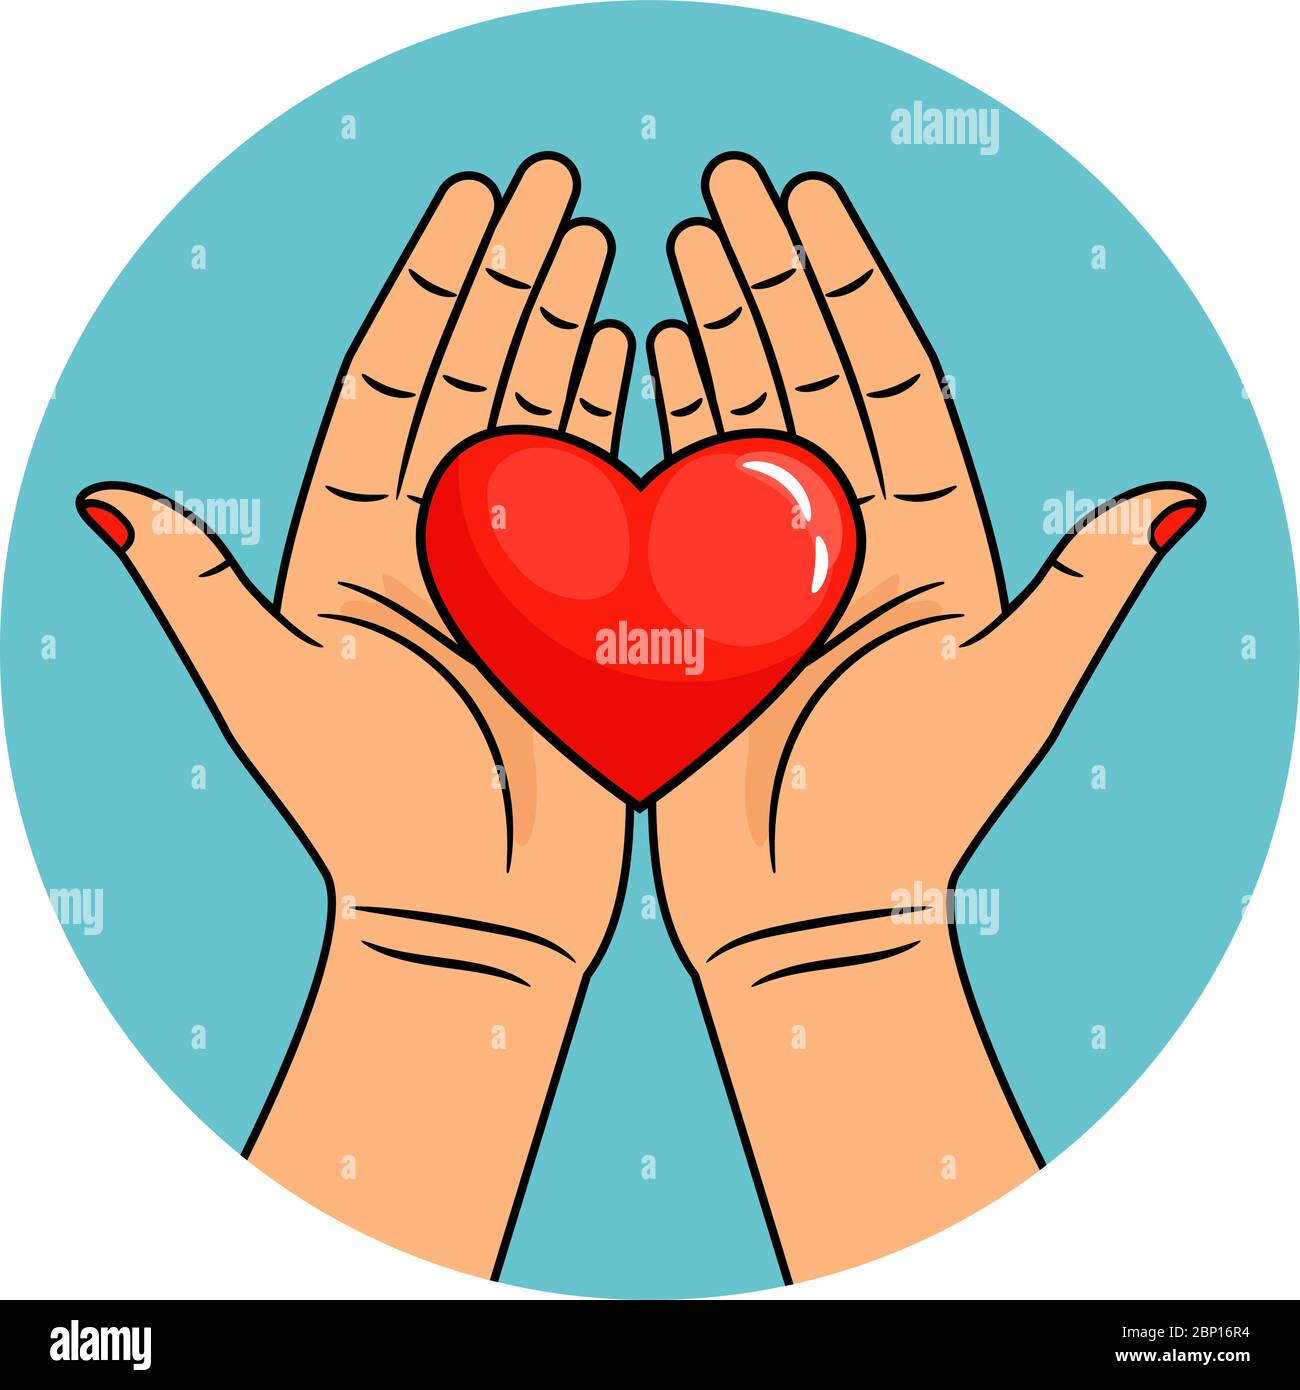 Hands and heart icon. Helpful and caring hands, kindness and charity sign, donation and love symbol vector illustration Stock Vector